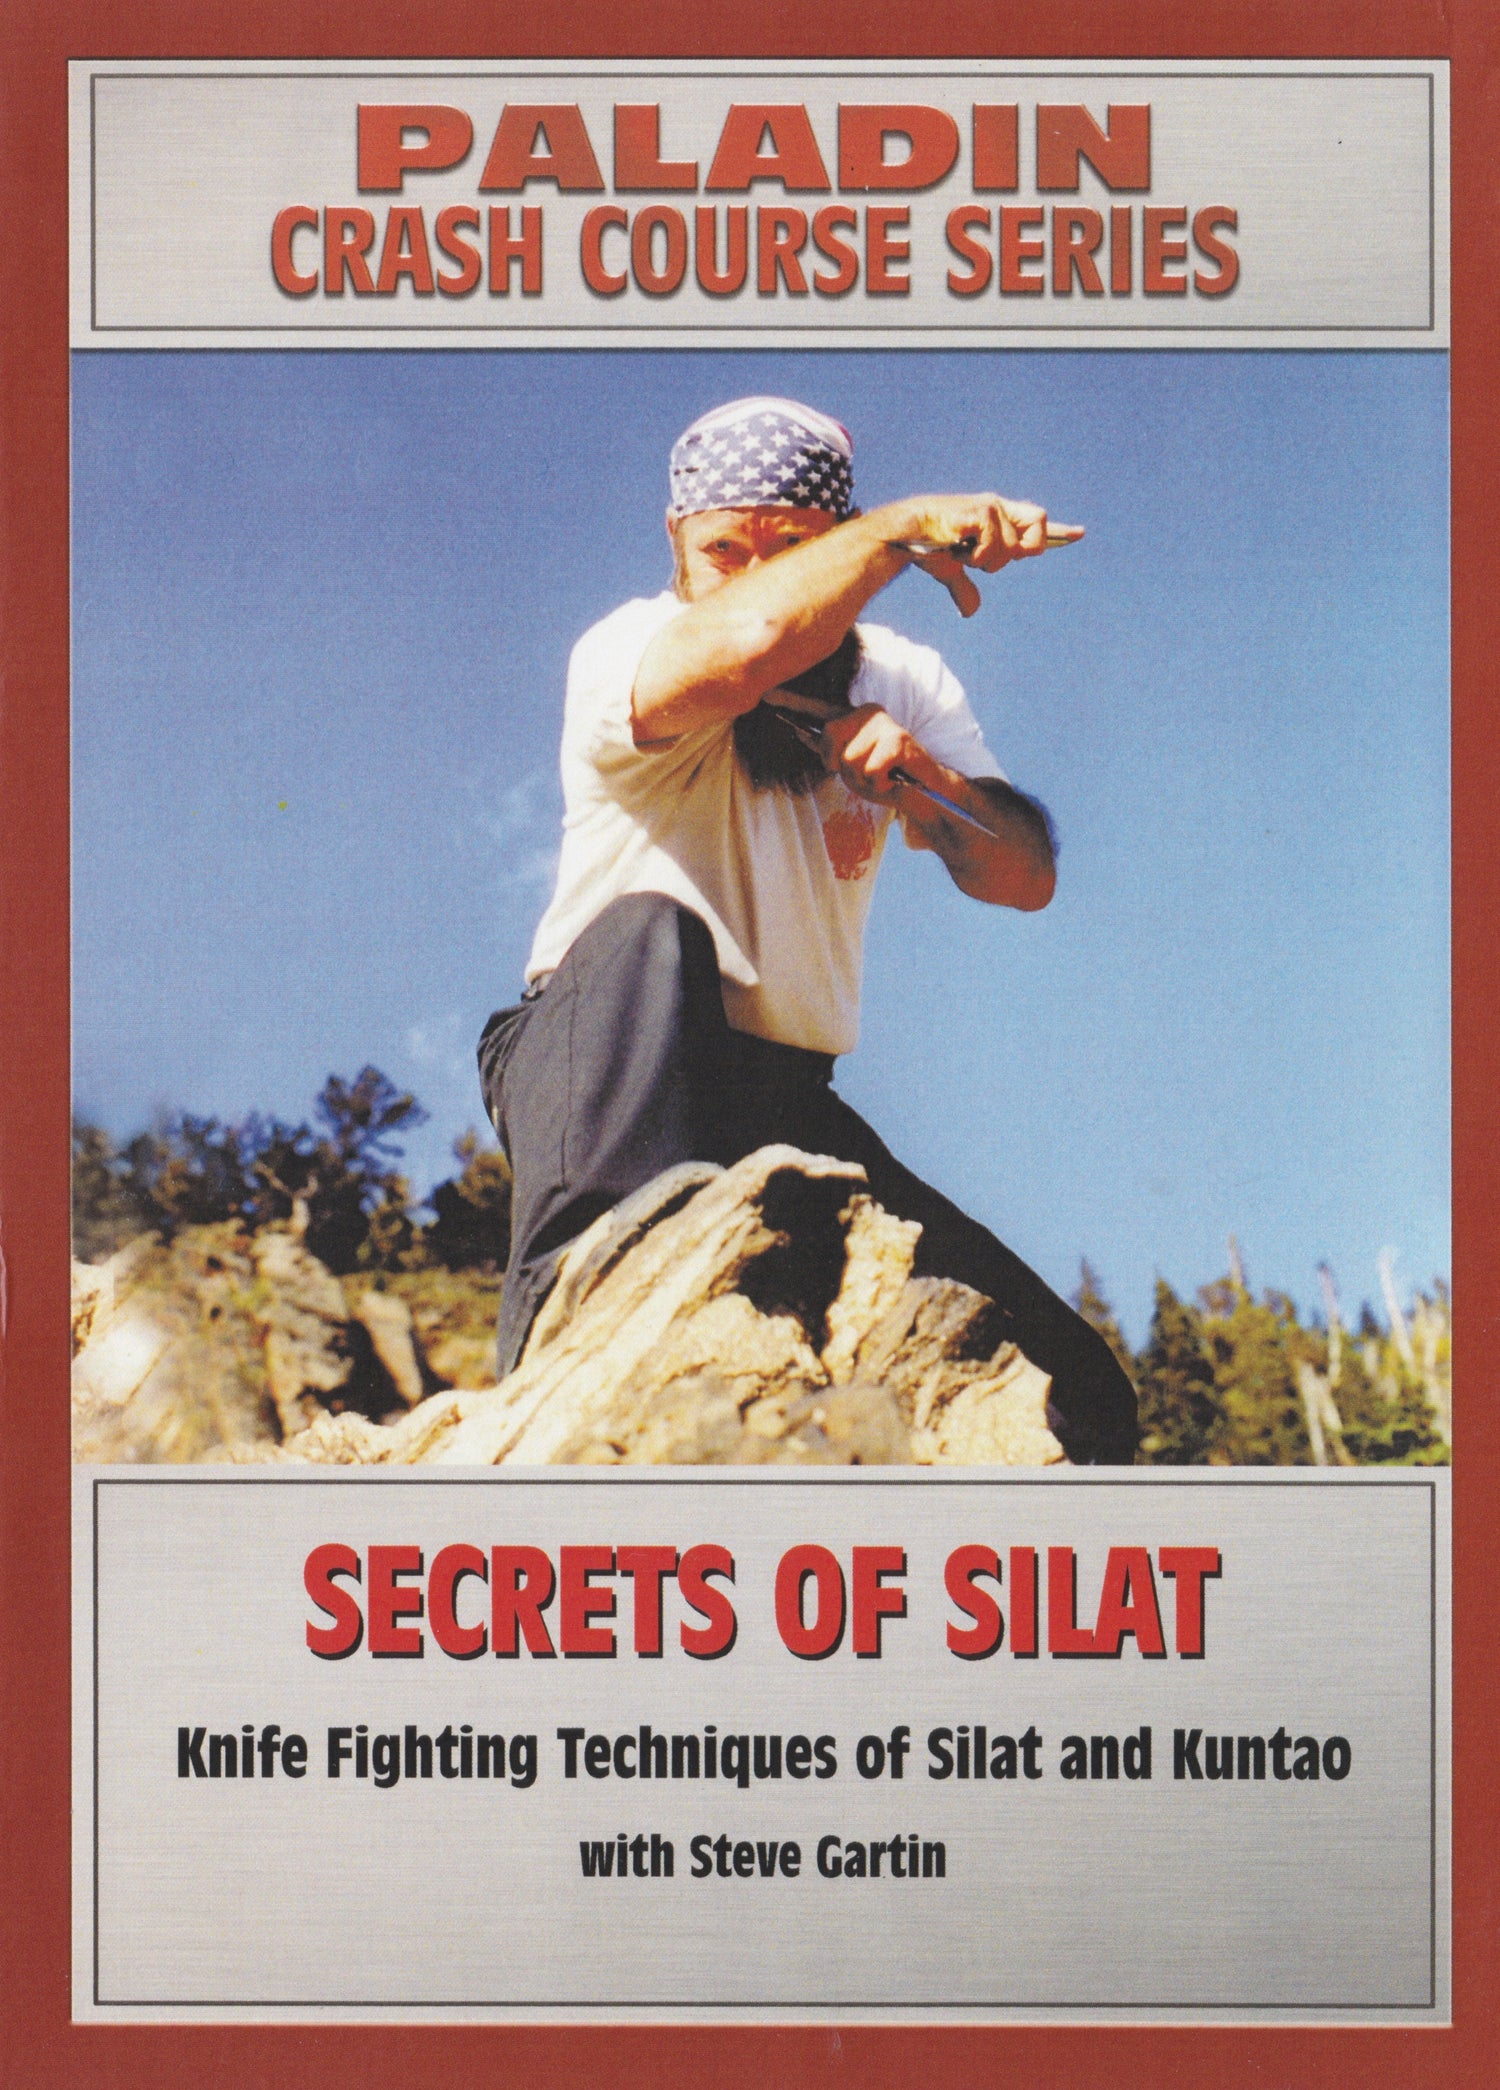 Secrets of Silat: Knife Fighting Techniques of Silat & Kuntao DVD by Steve Gartin (Preowned)